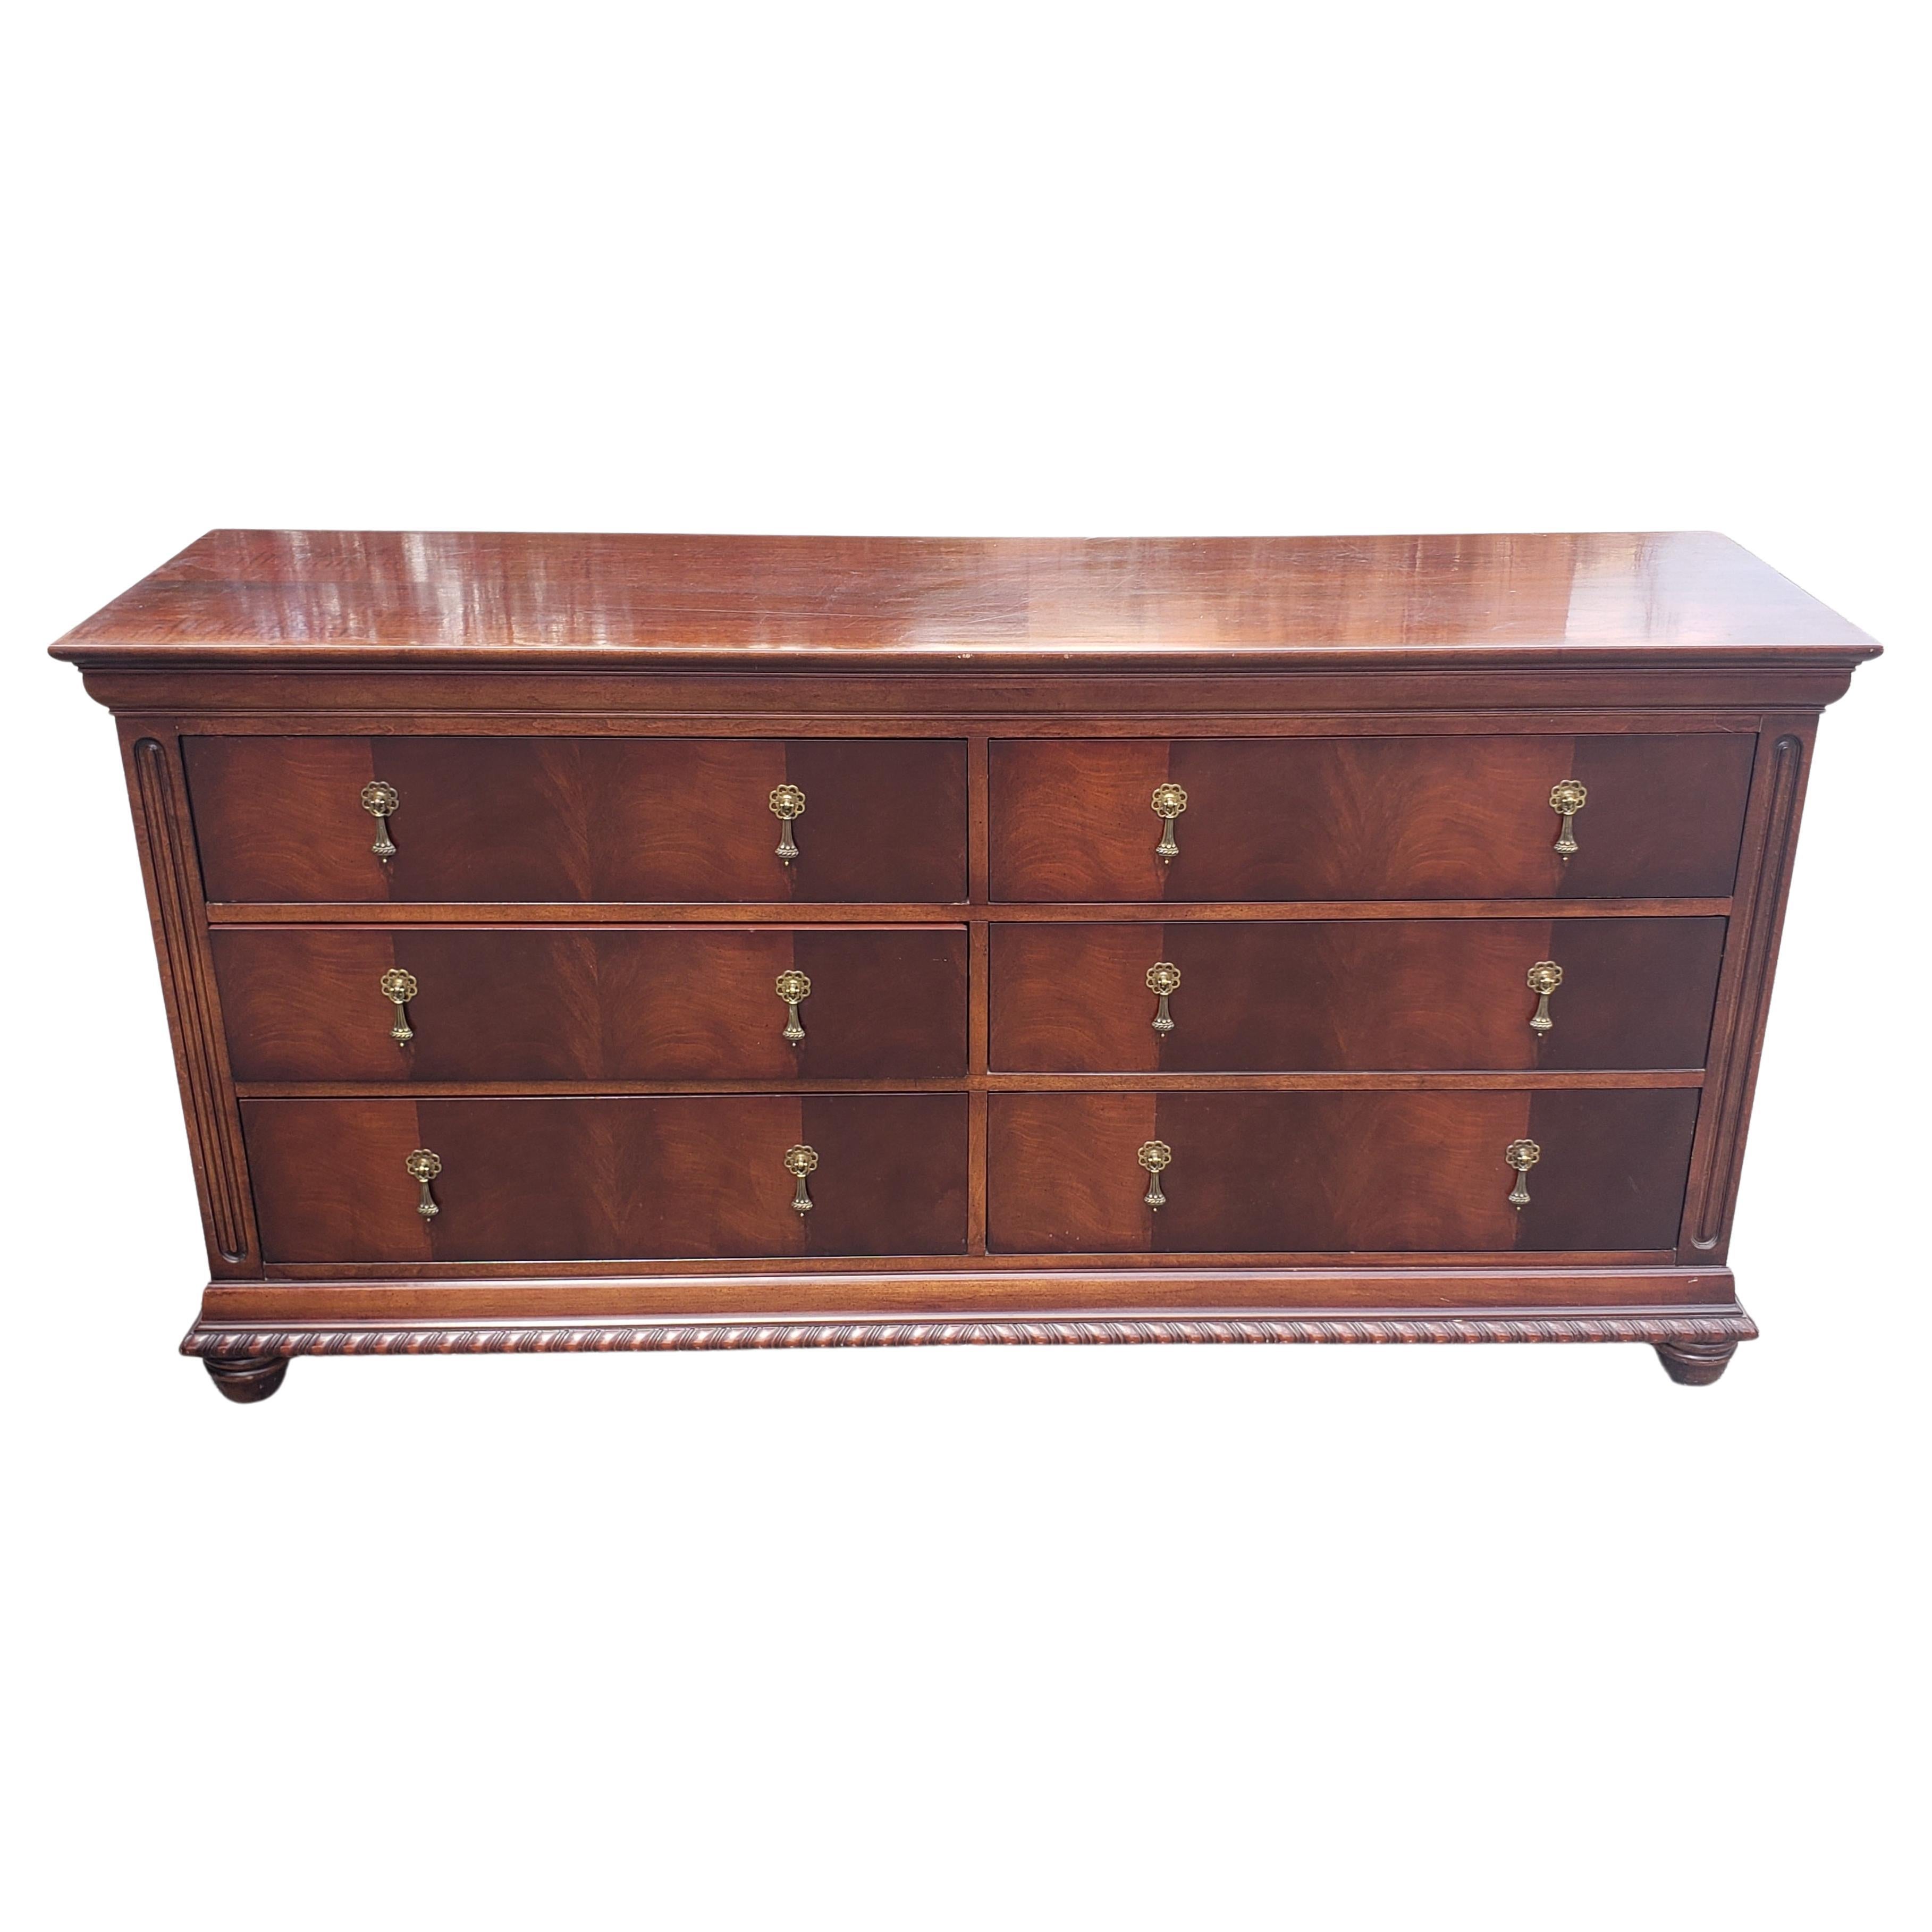 A well kept National Mt-Airy Flame Mahogany Double Dresser in solid and flame mahogany. Features 6 dovetailed drawers operating perfectly. Measures 68